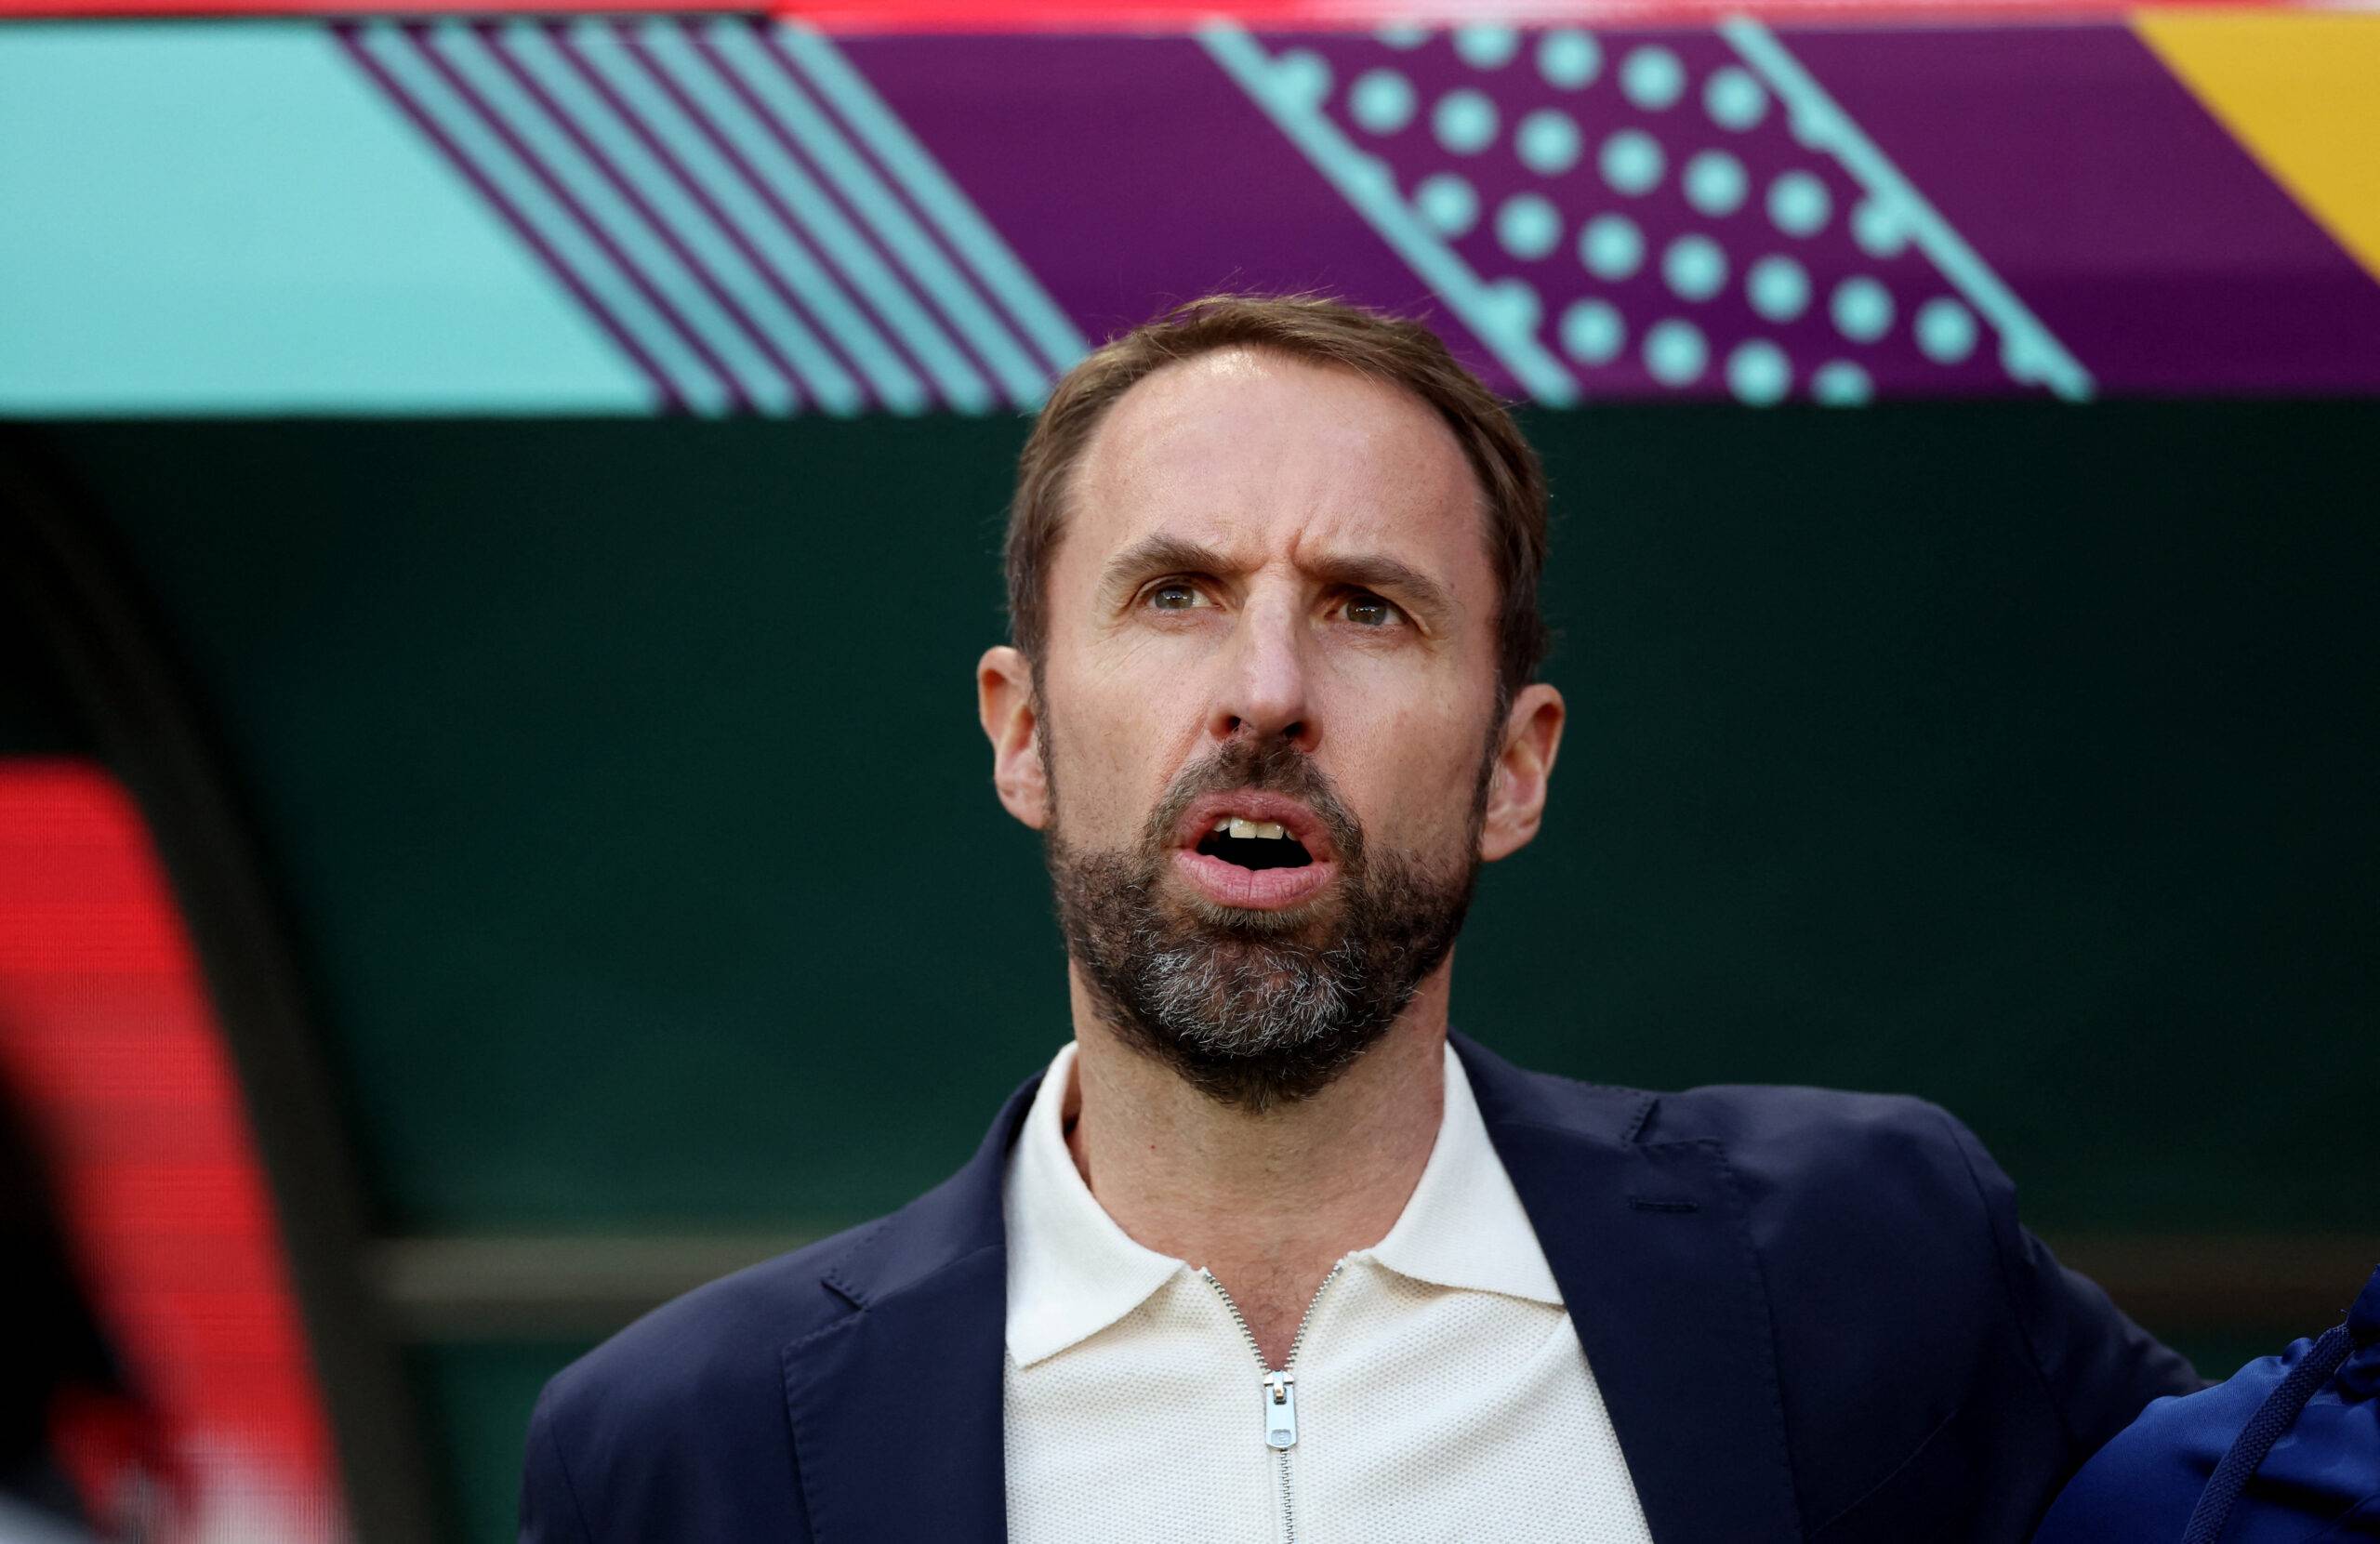 England manager Gareth Southgate during the national anthem before World Cup opener